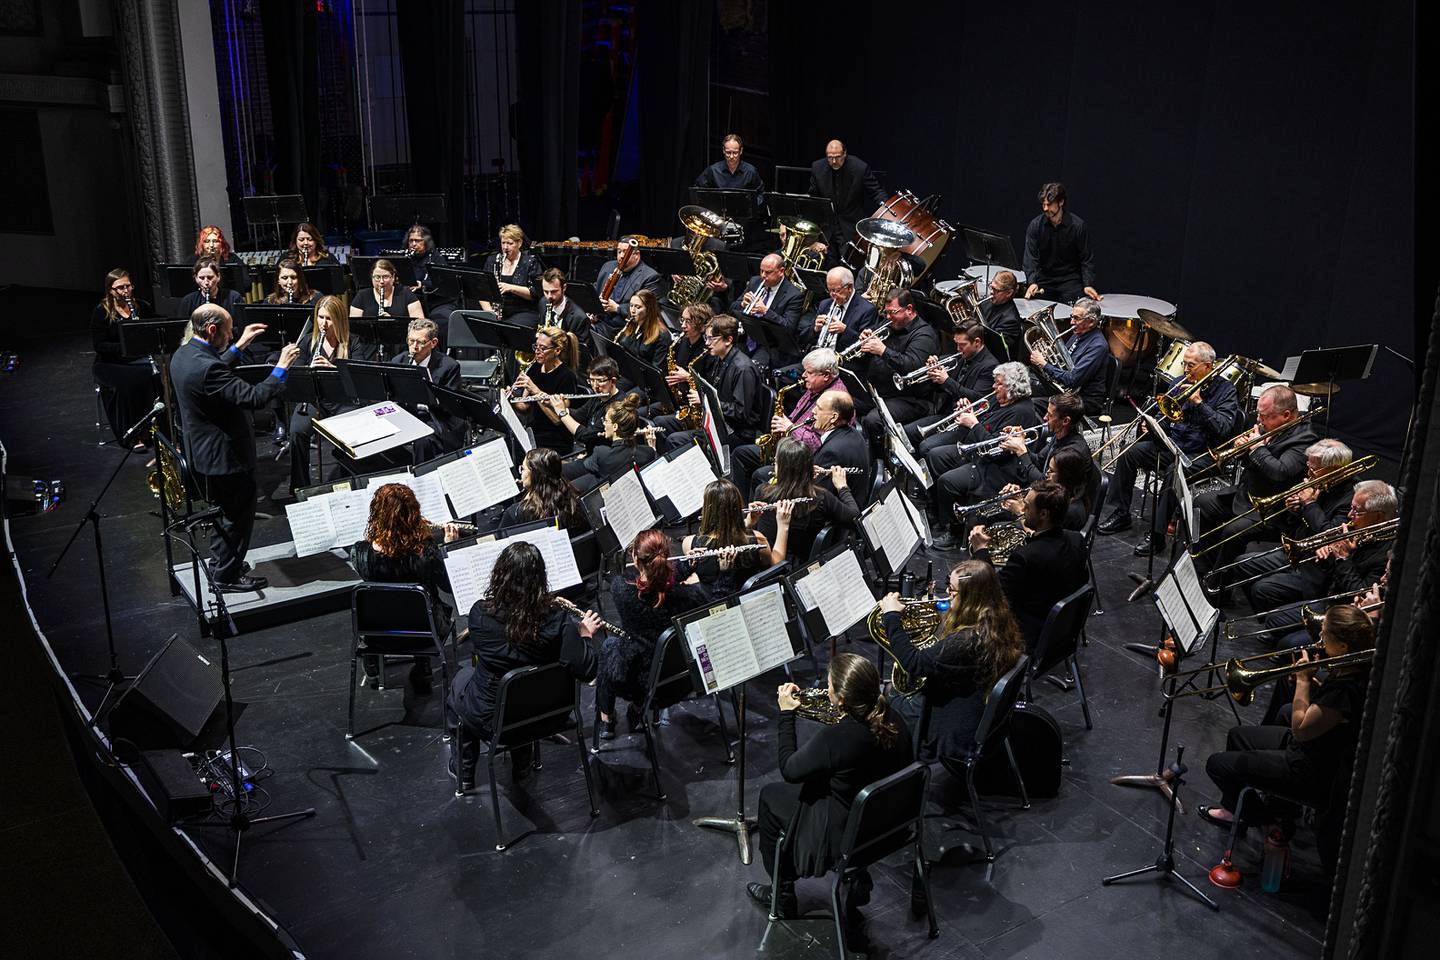 The Dixon Municipal Band held a spring concert at the Dixon Historic Theatre Saturday, March 4, 2023. The band started the show with the selection “Esprit De Corps” by Robert Jager.